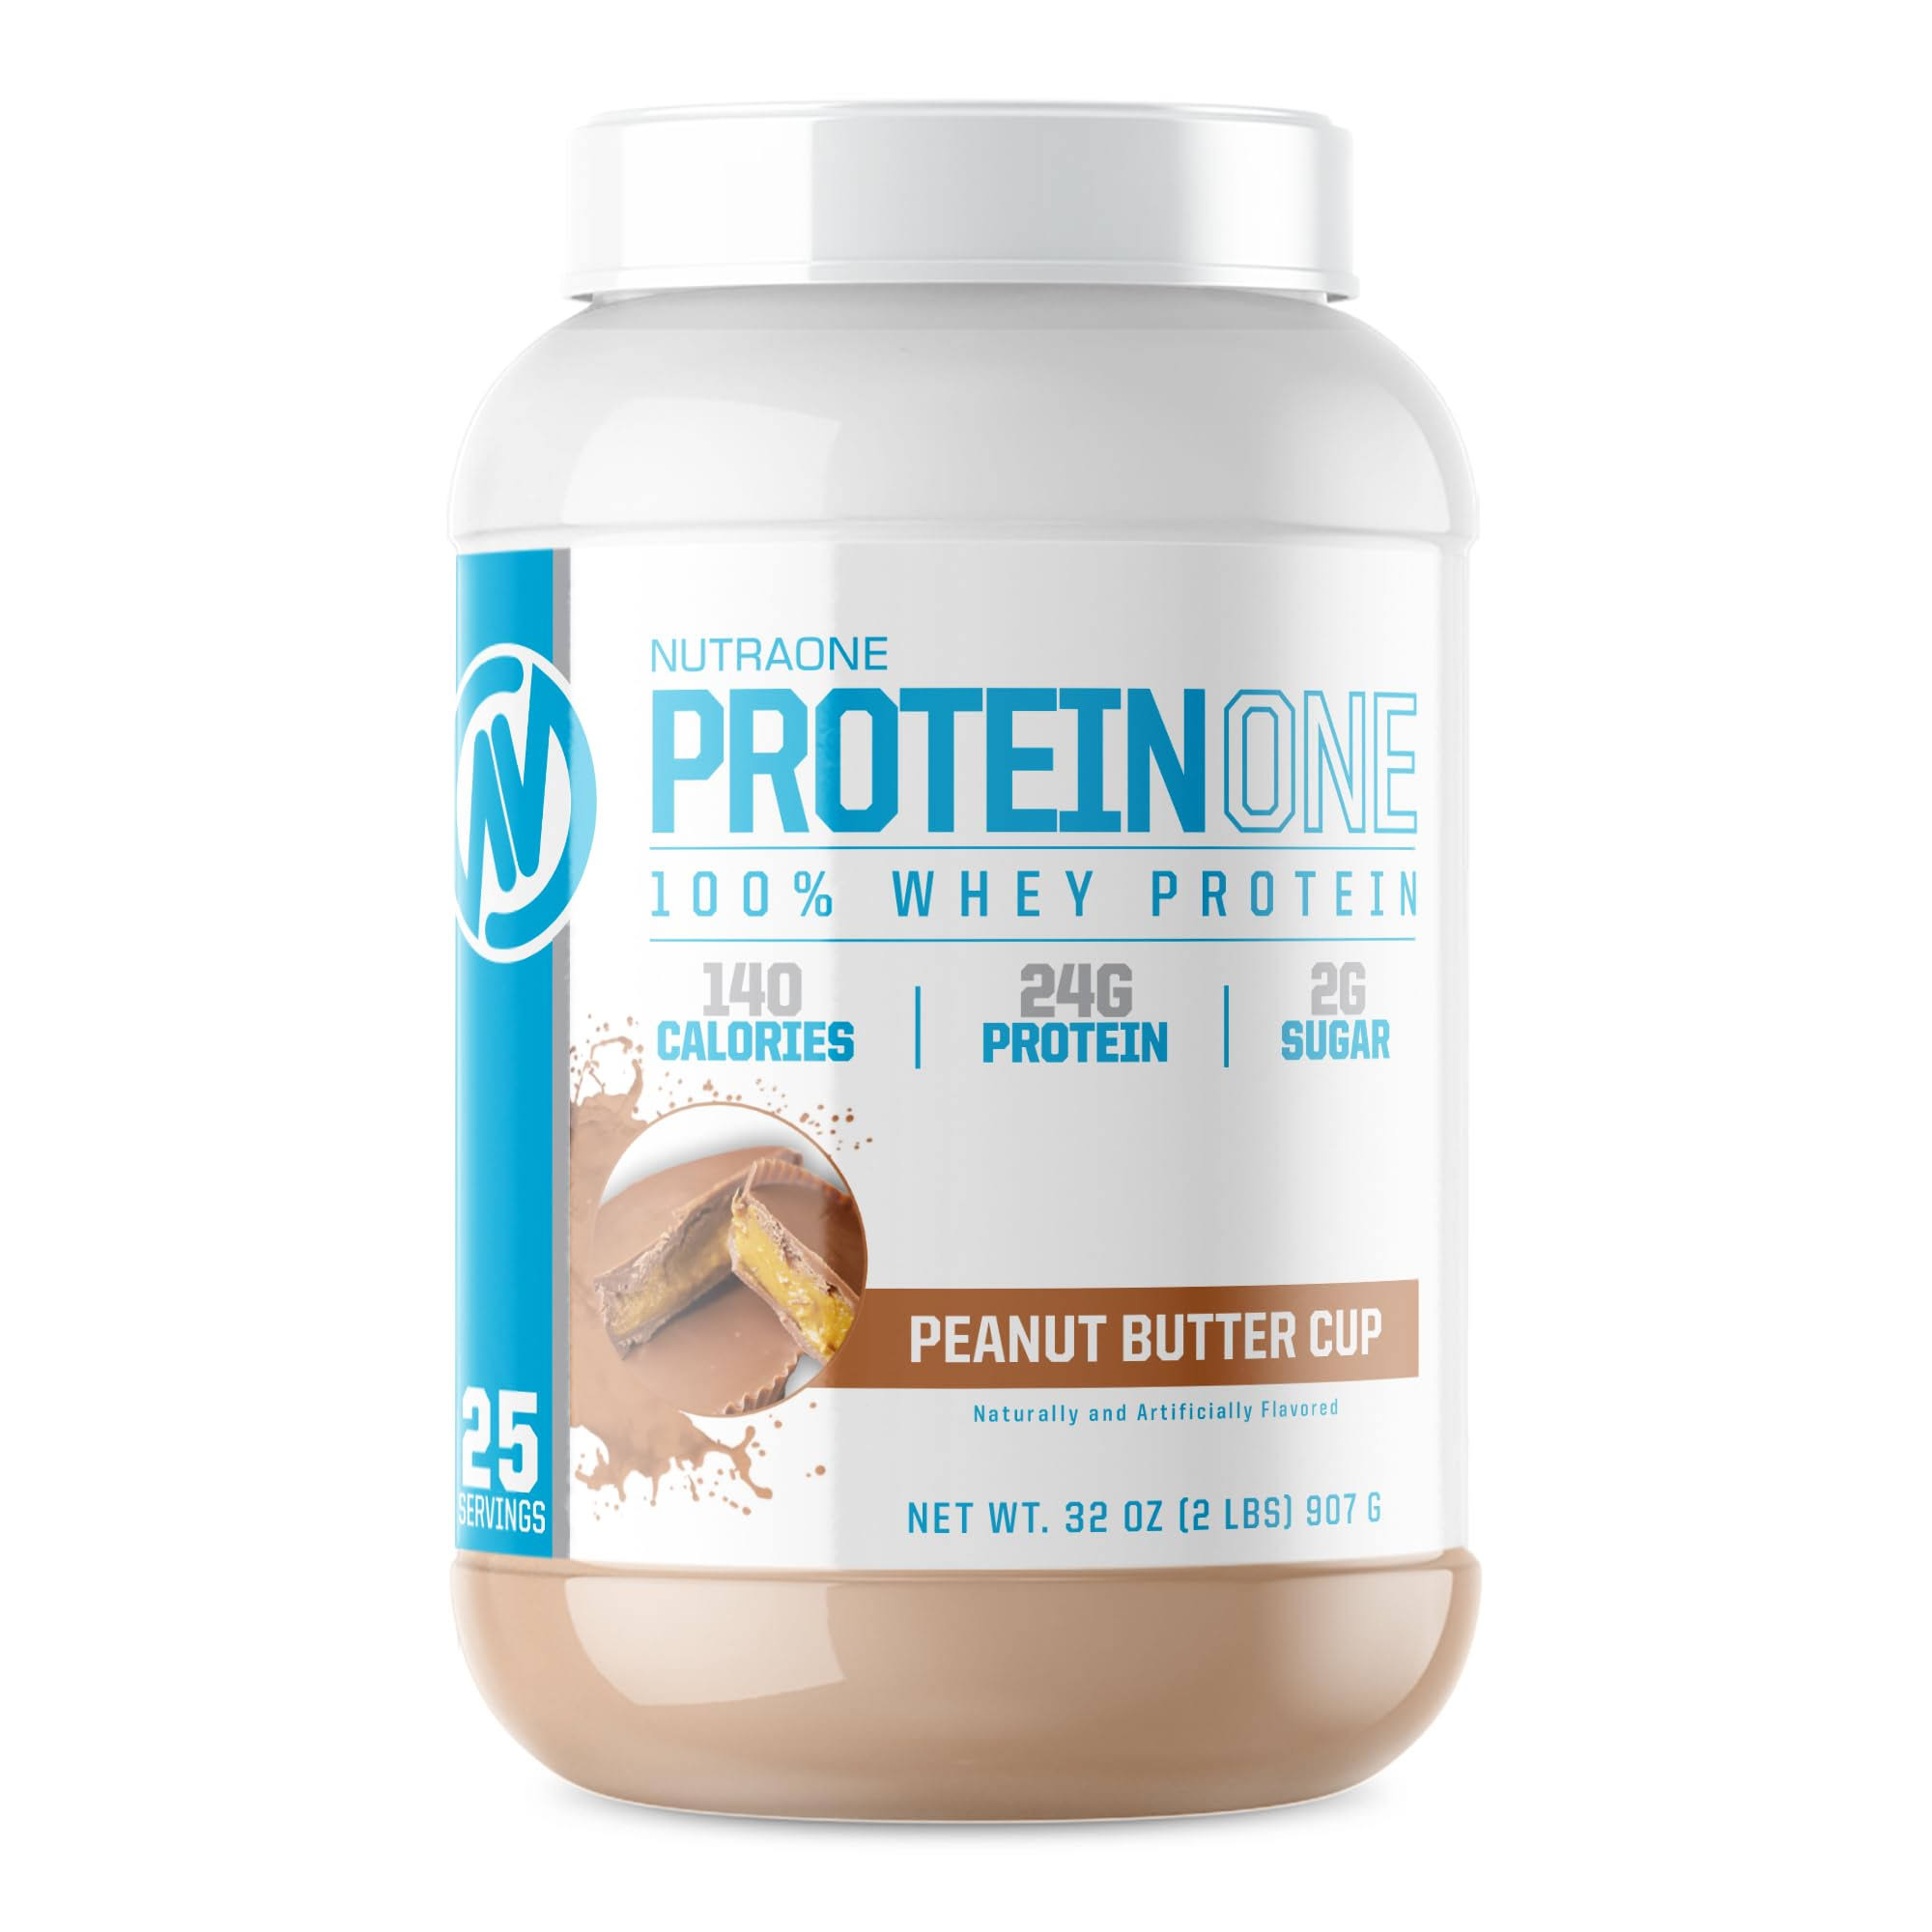 NutraOne ProteinOne Whey Protein Promote Recovery and Build Muscle with a Protein Shake Powder for Men & Women (Chocolate PB Cup - 2 LB)